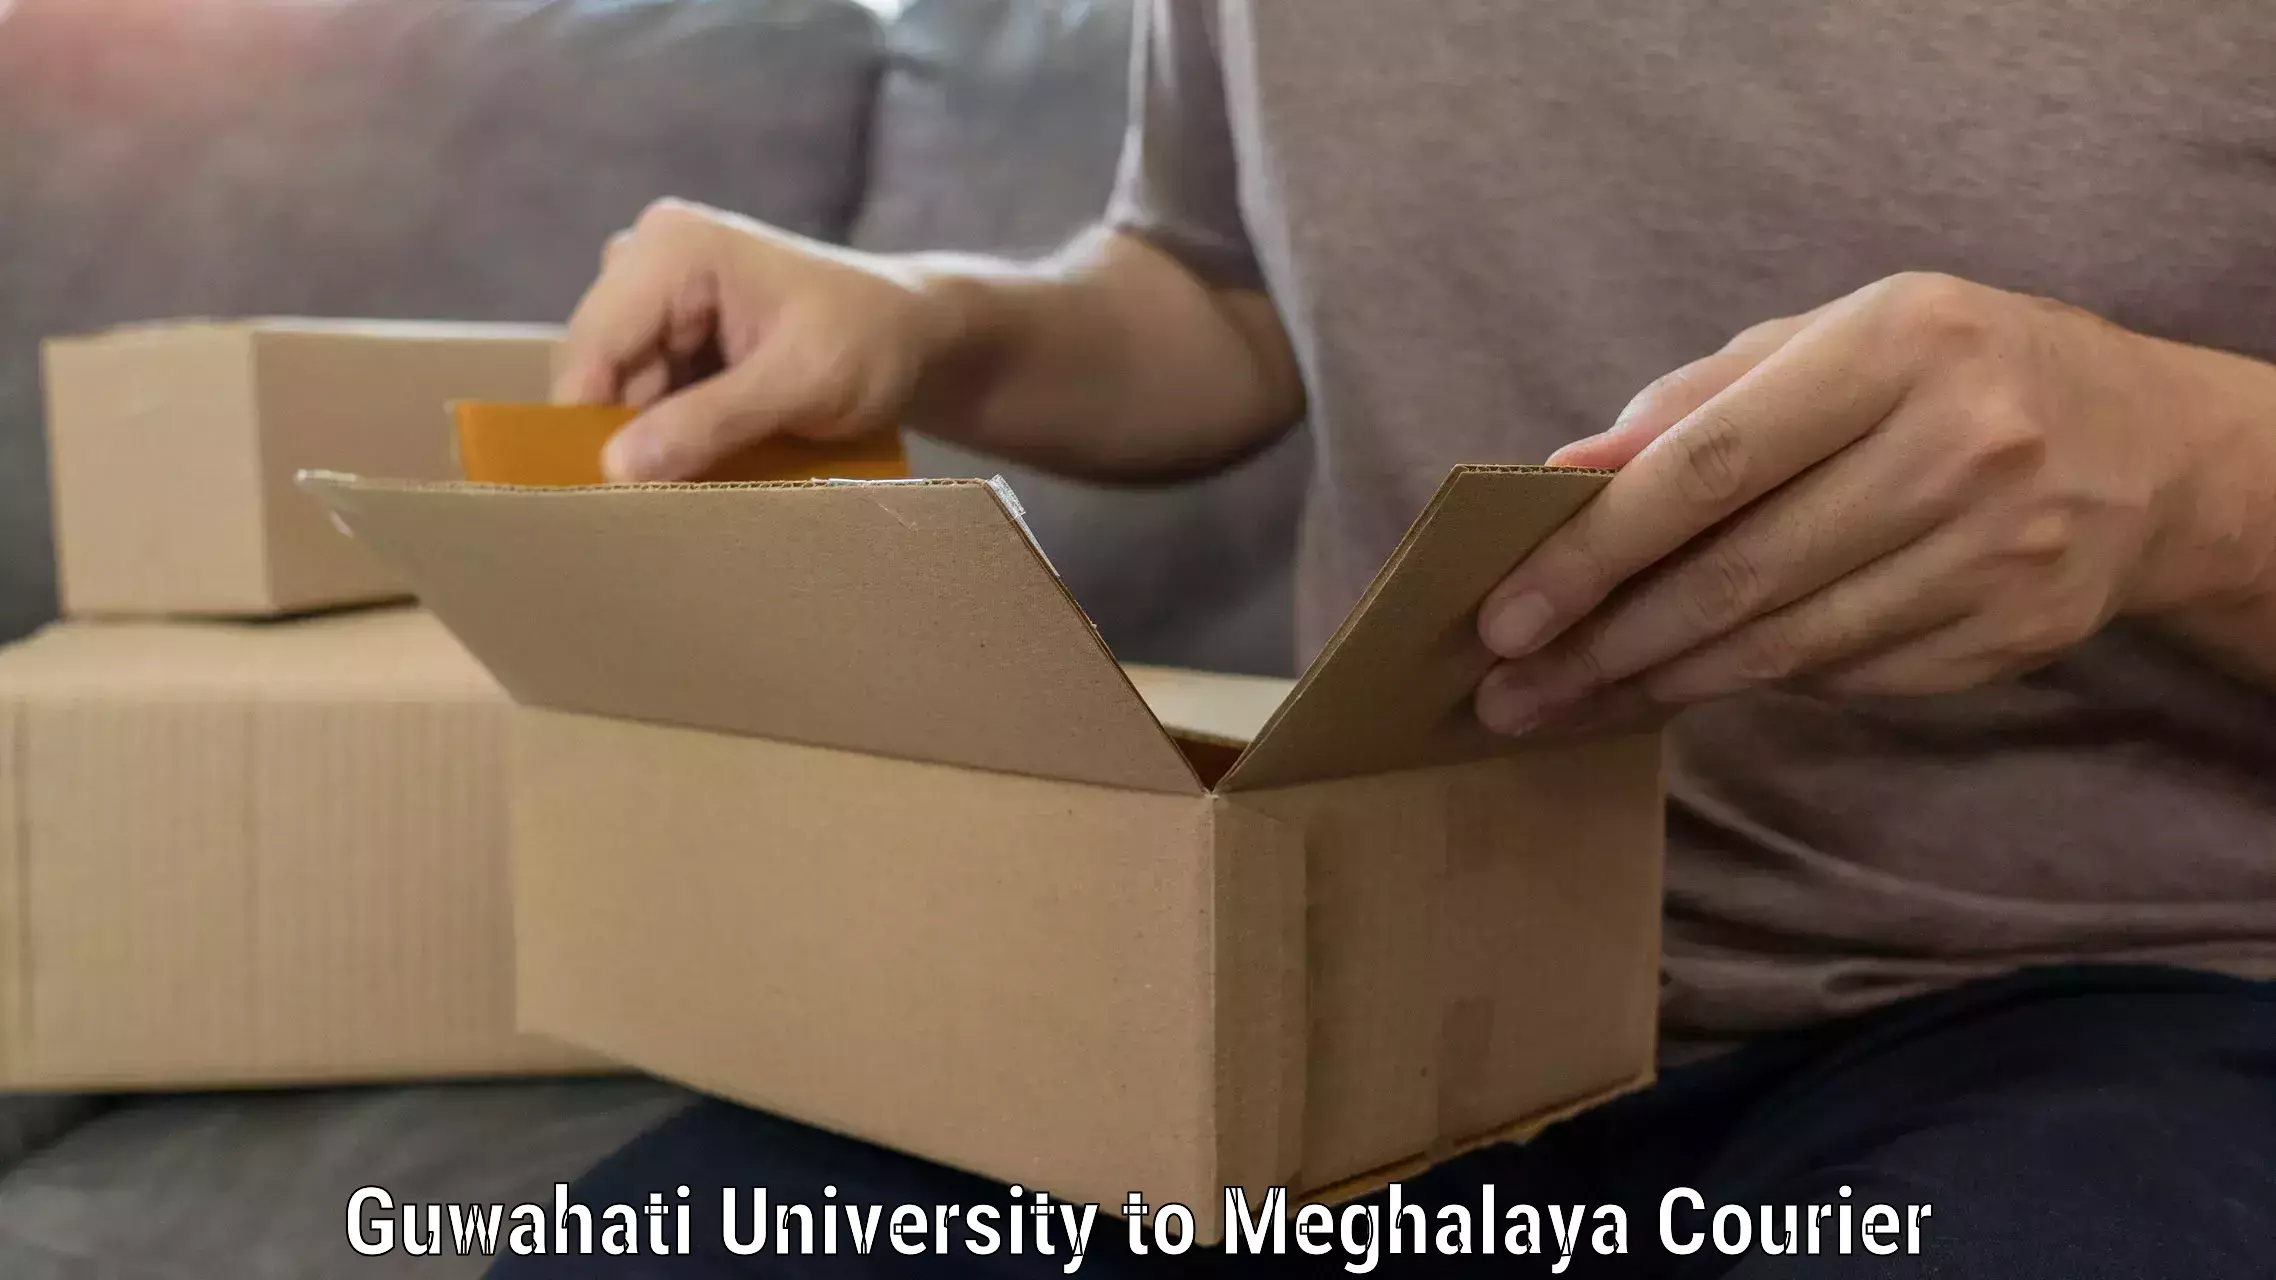 Reliable movers in Guwahati University to Jowai